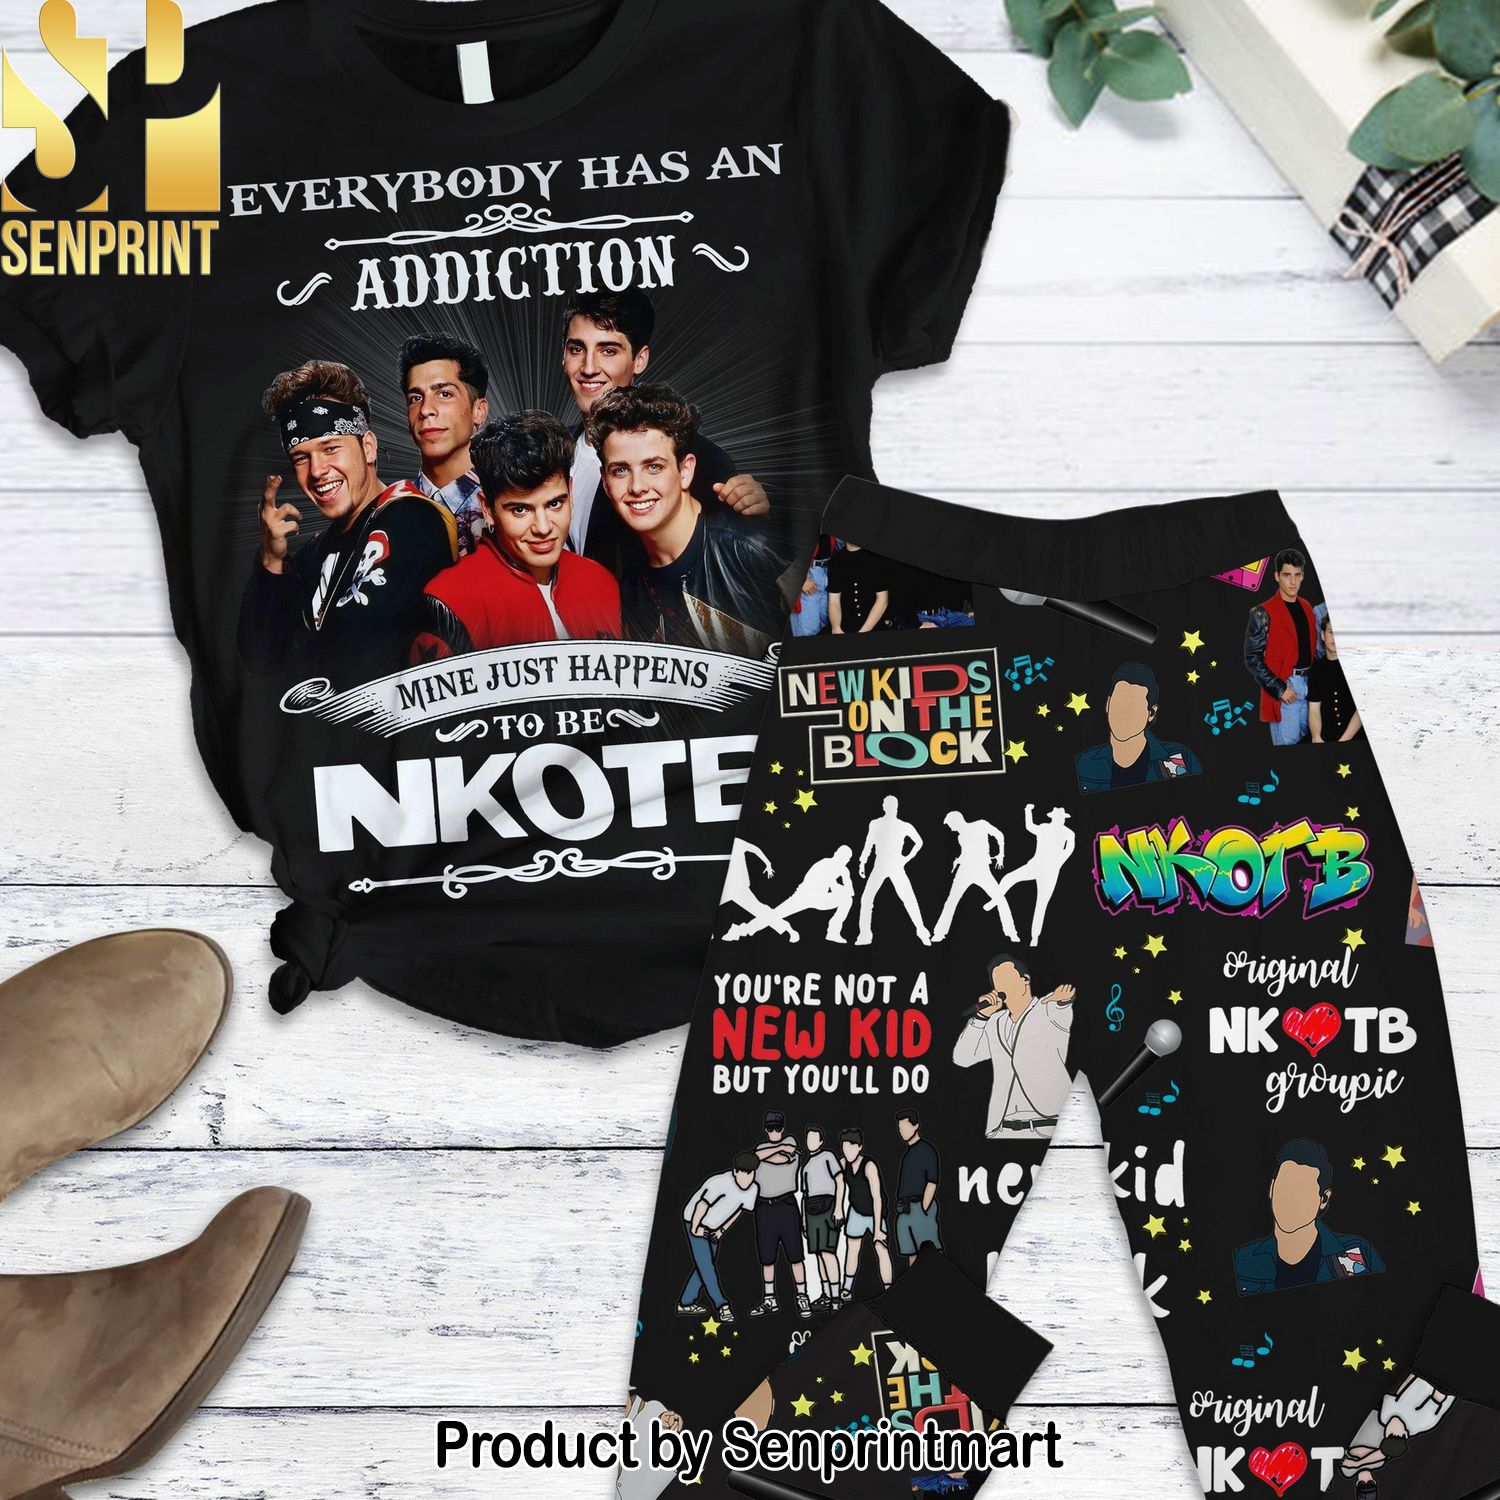 New Kids on the Block 3D All Over Print Pajama Sets